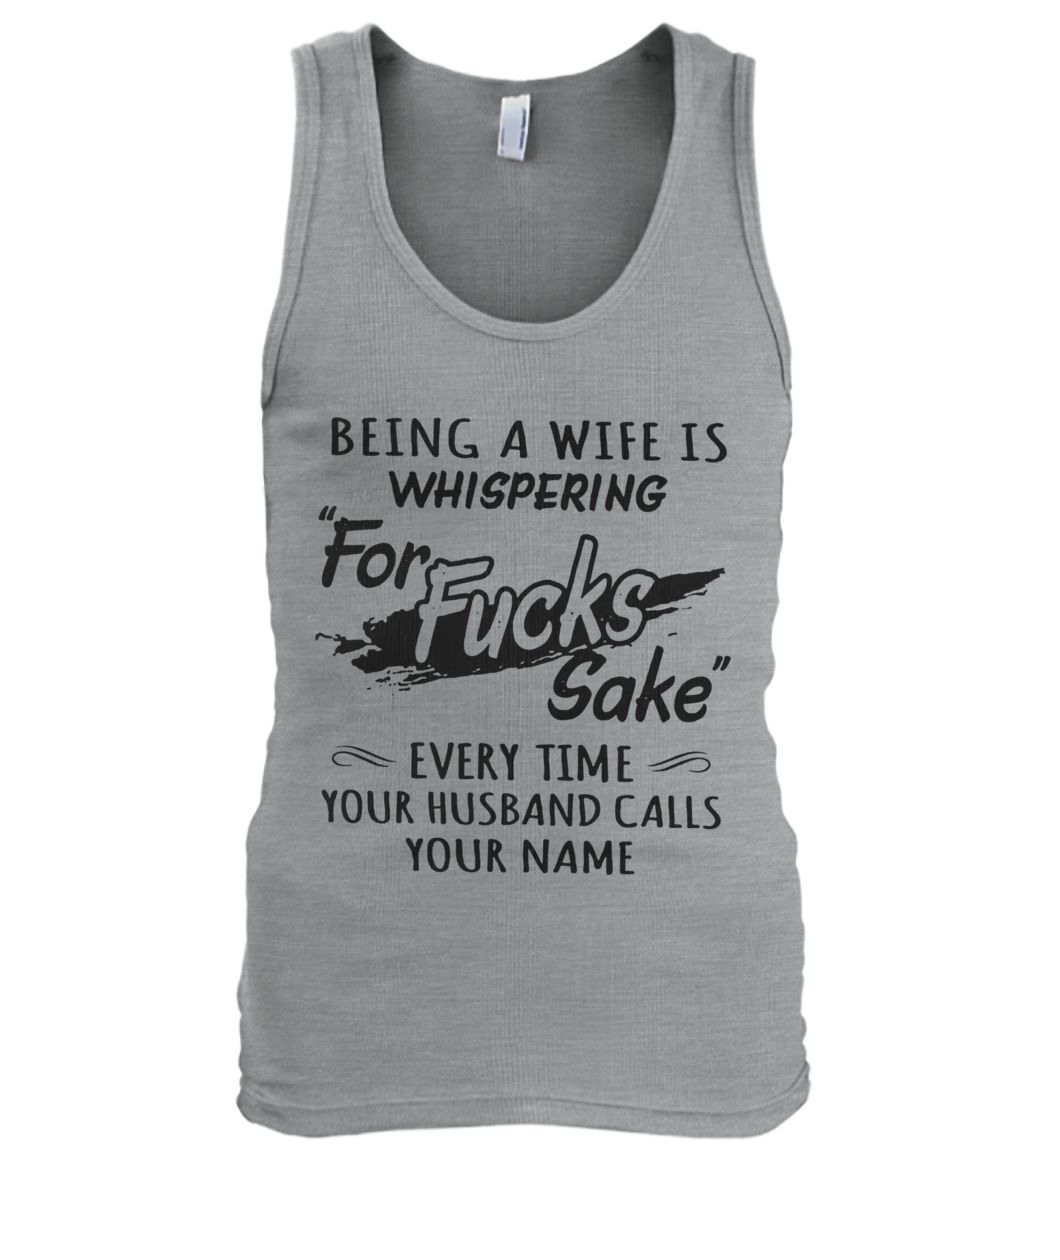 Being a wife is whispering for fucks sake every time your husband calls your name men's tank top